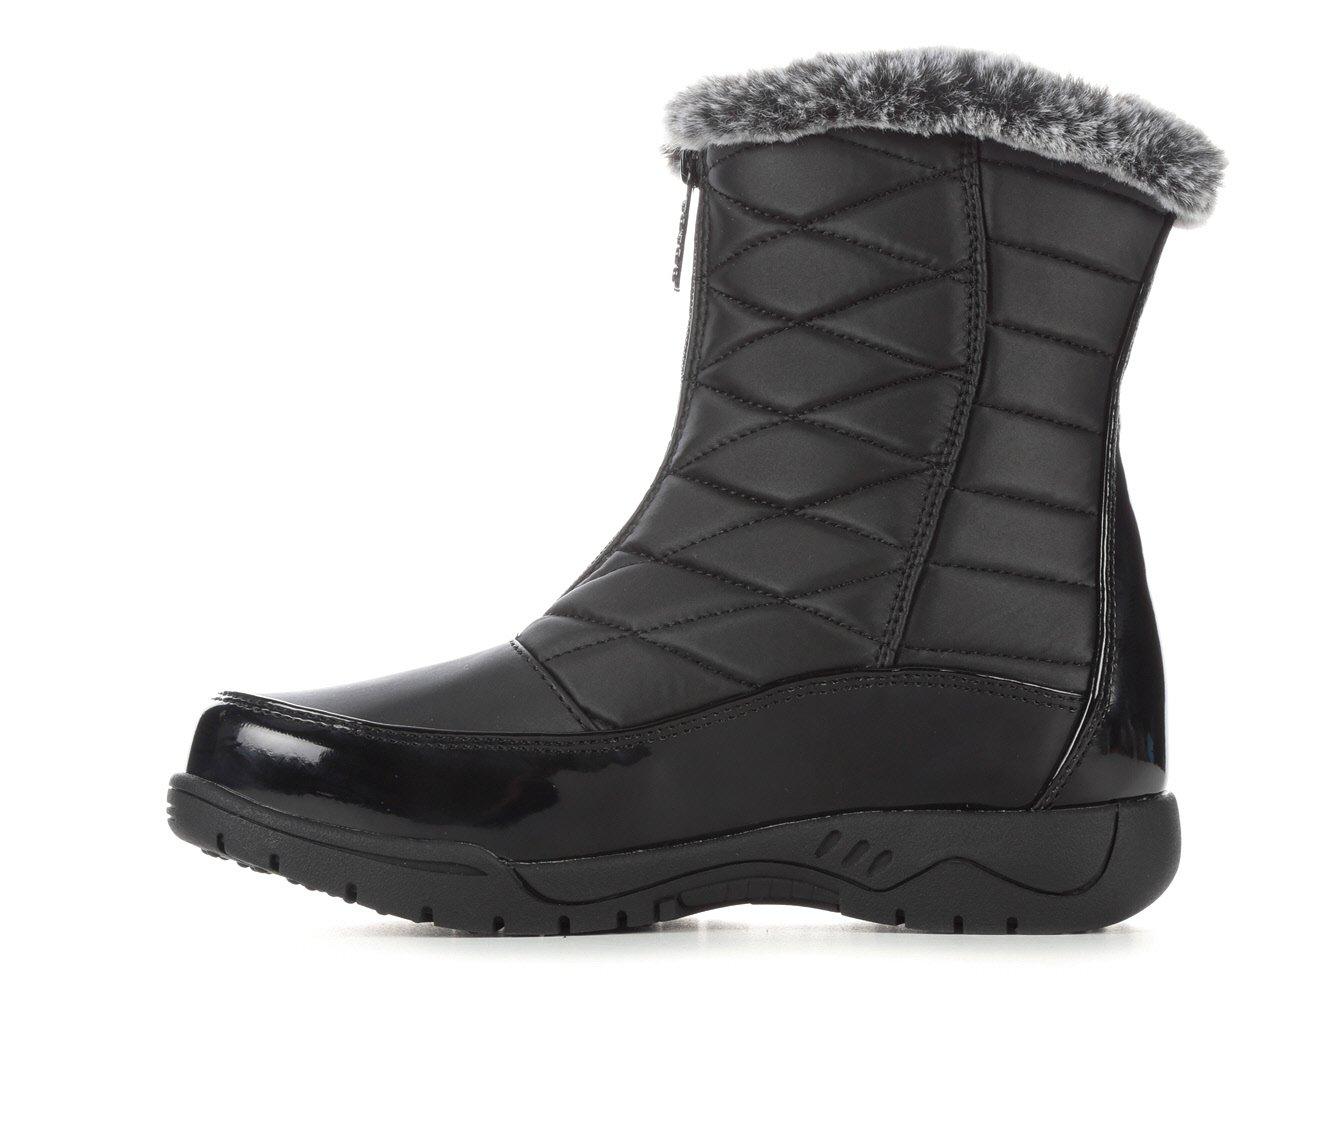 Women's Totes Esther Winter Boots | Shoe Carnival